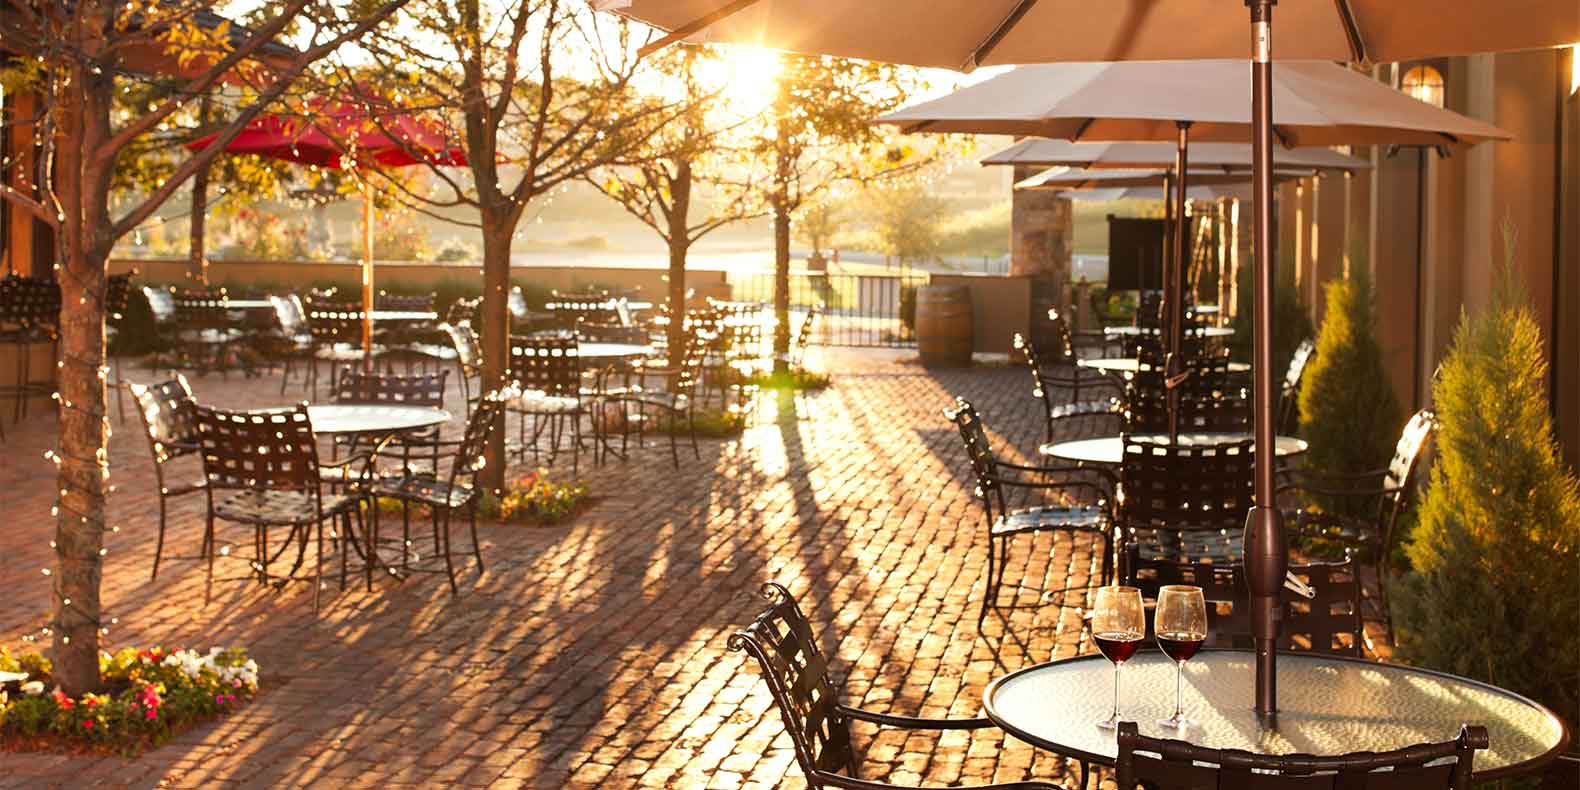 3 Tips on How to Prevent Patio Furniture Theft at Your Restaurant